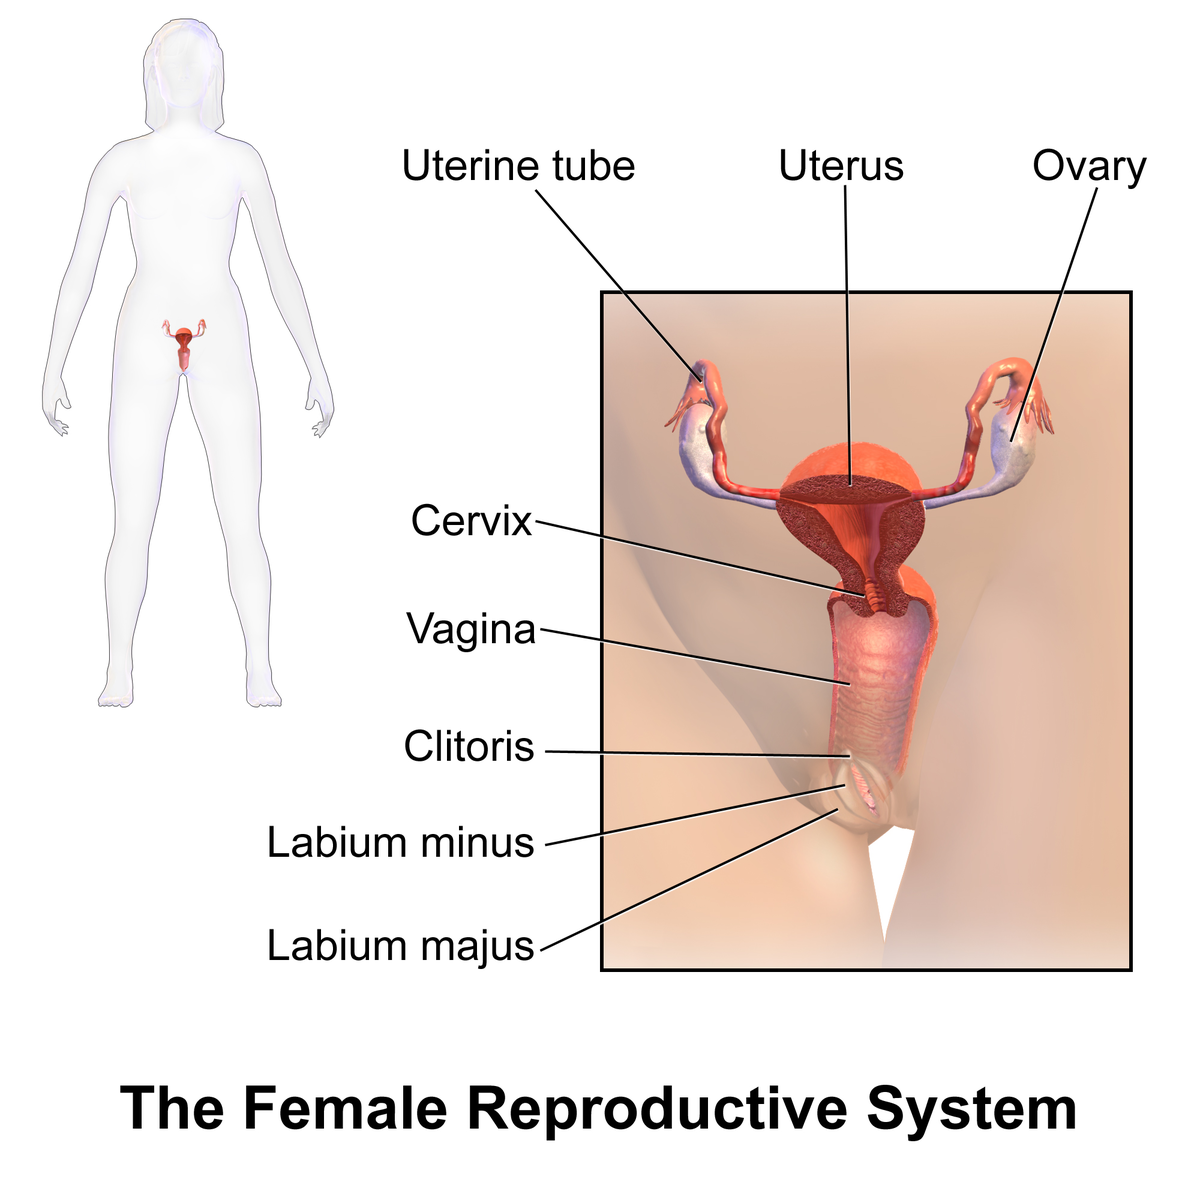 Females with both sex organs